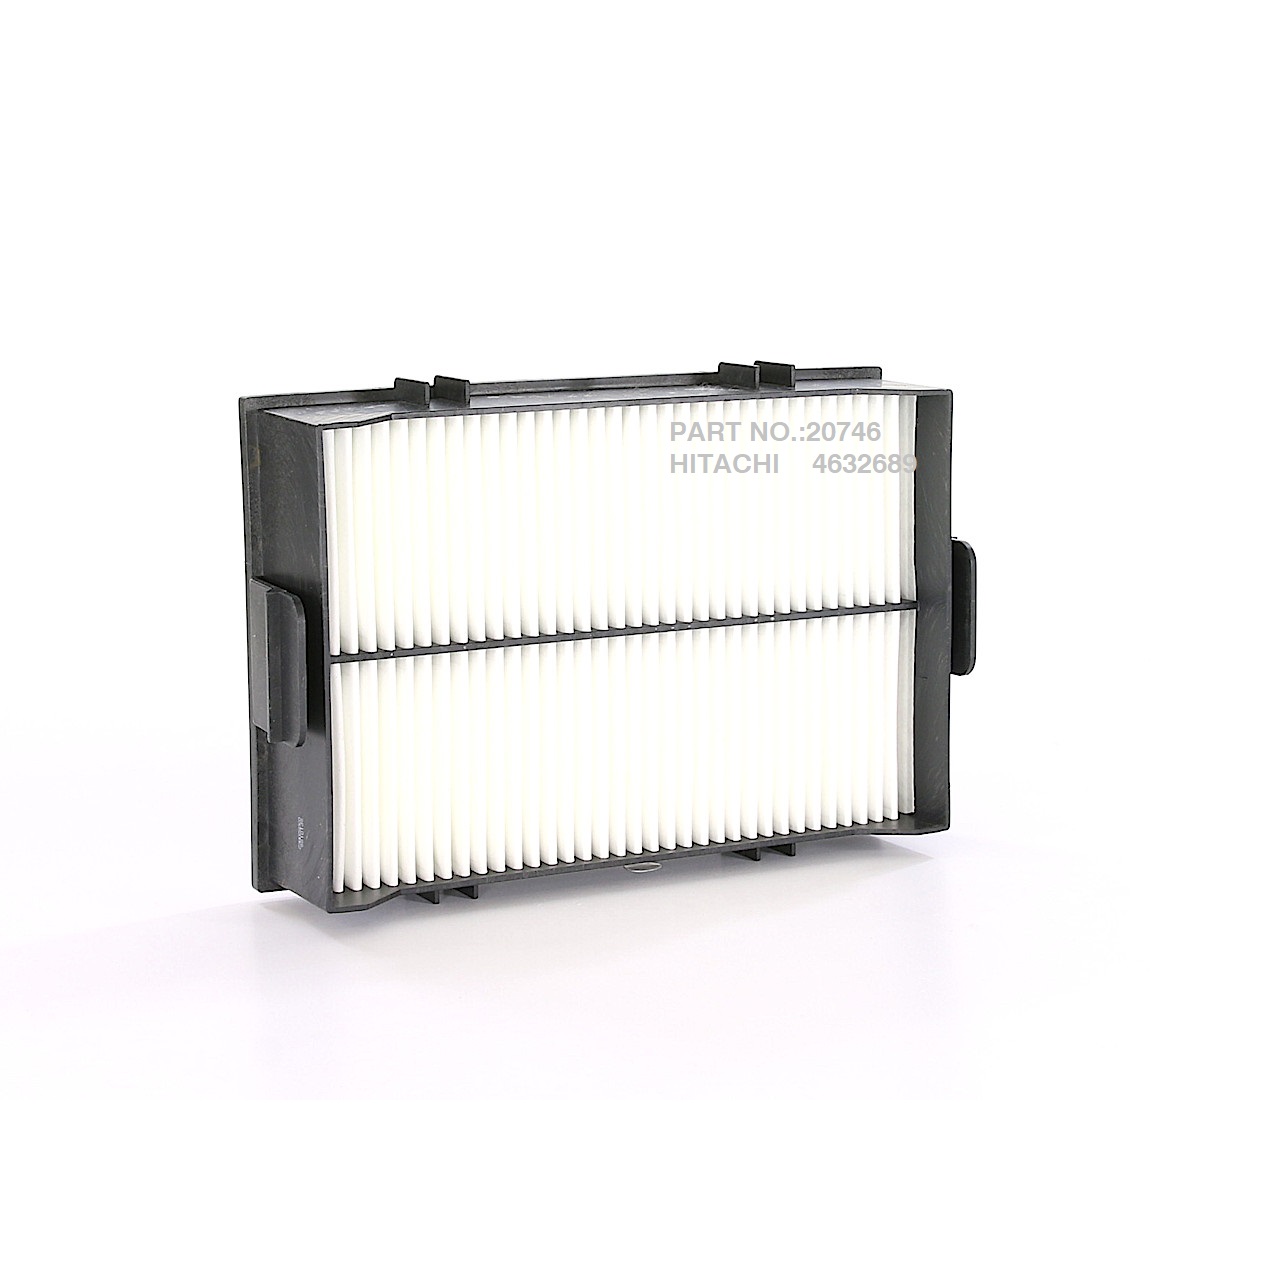 20746 CABIN AIR FILTER FOR HITACHI